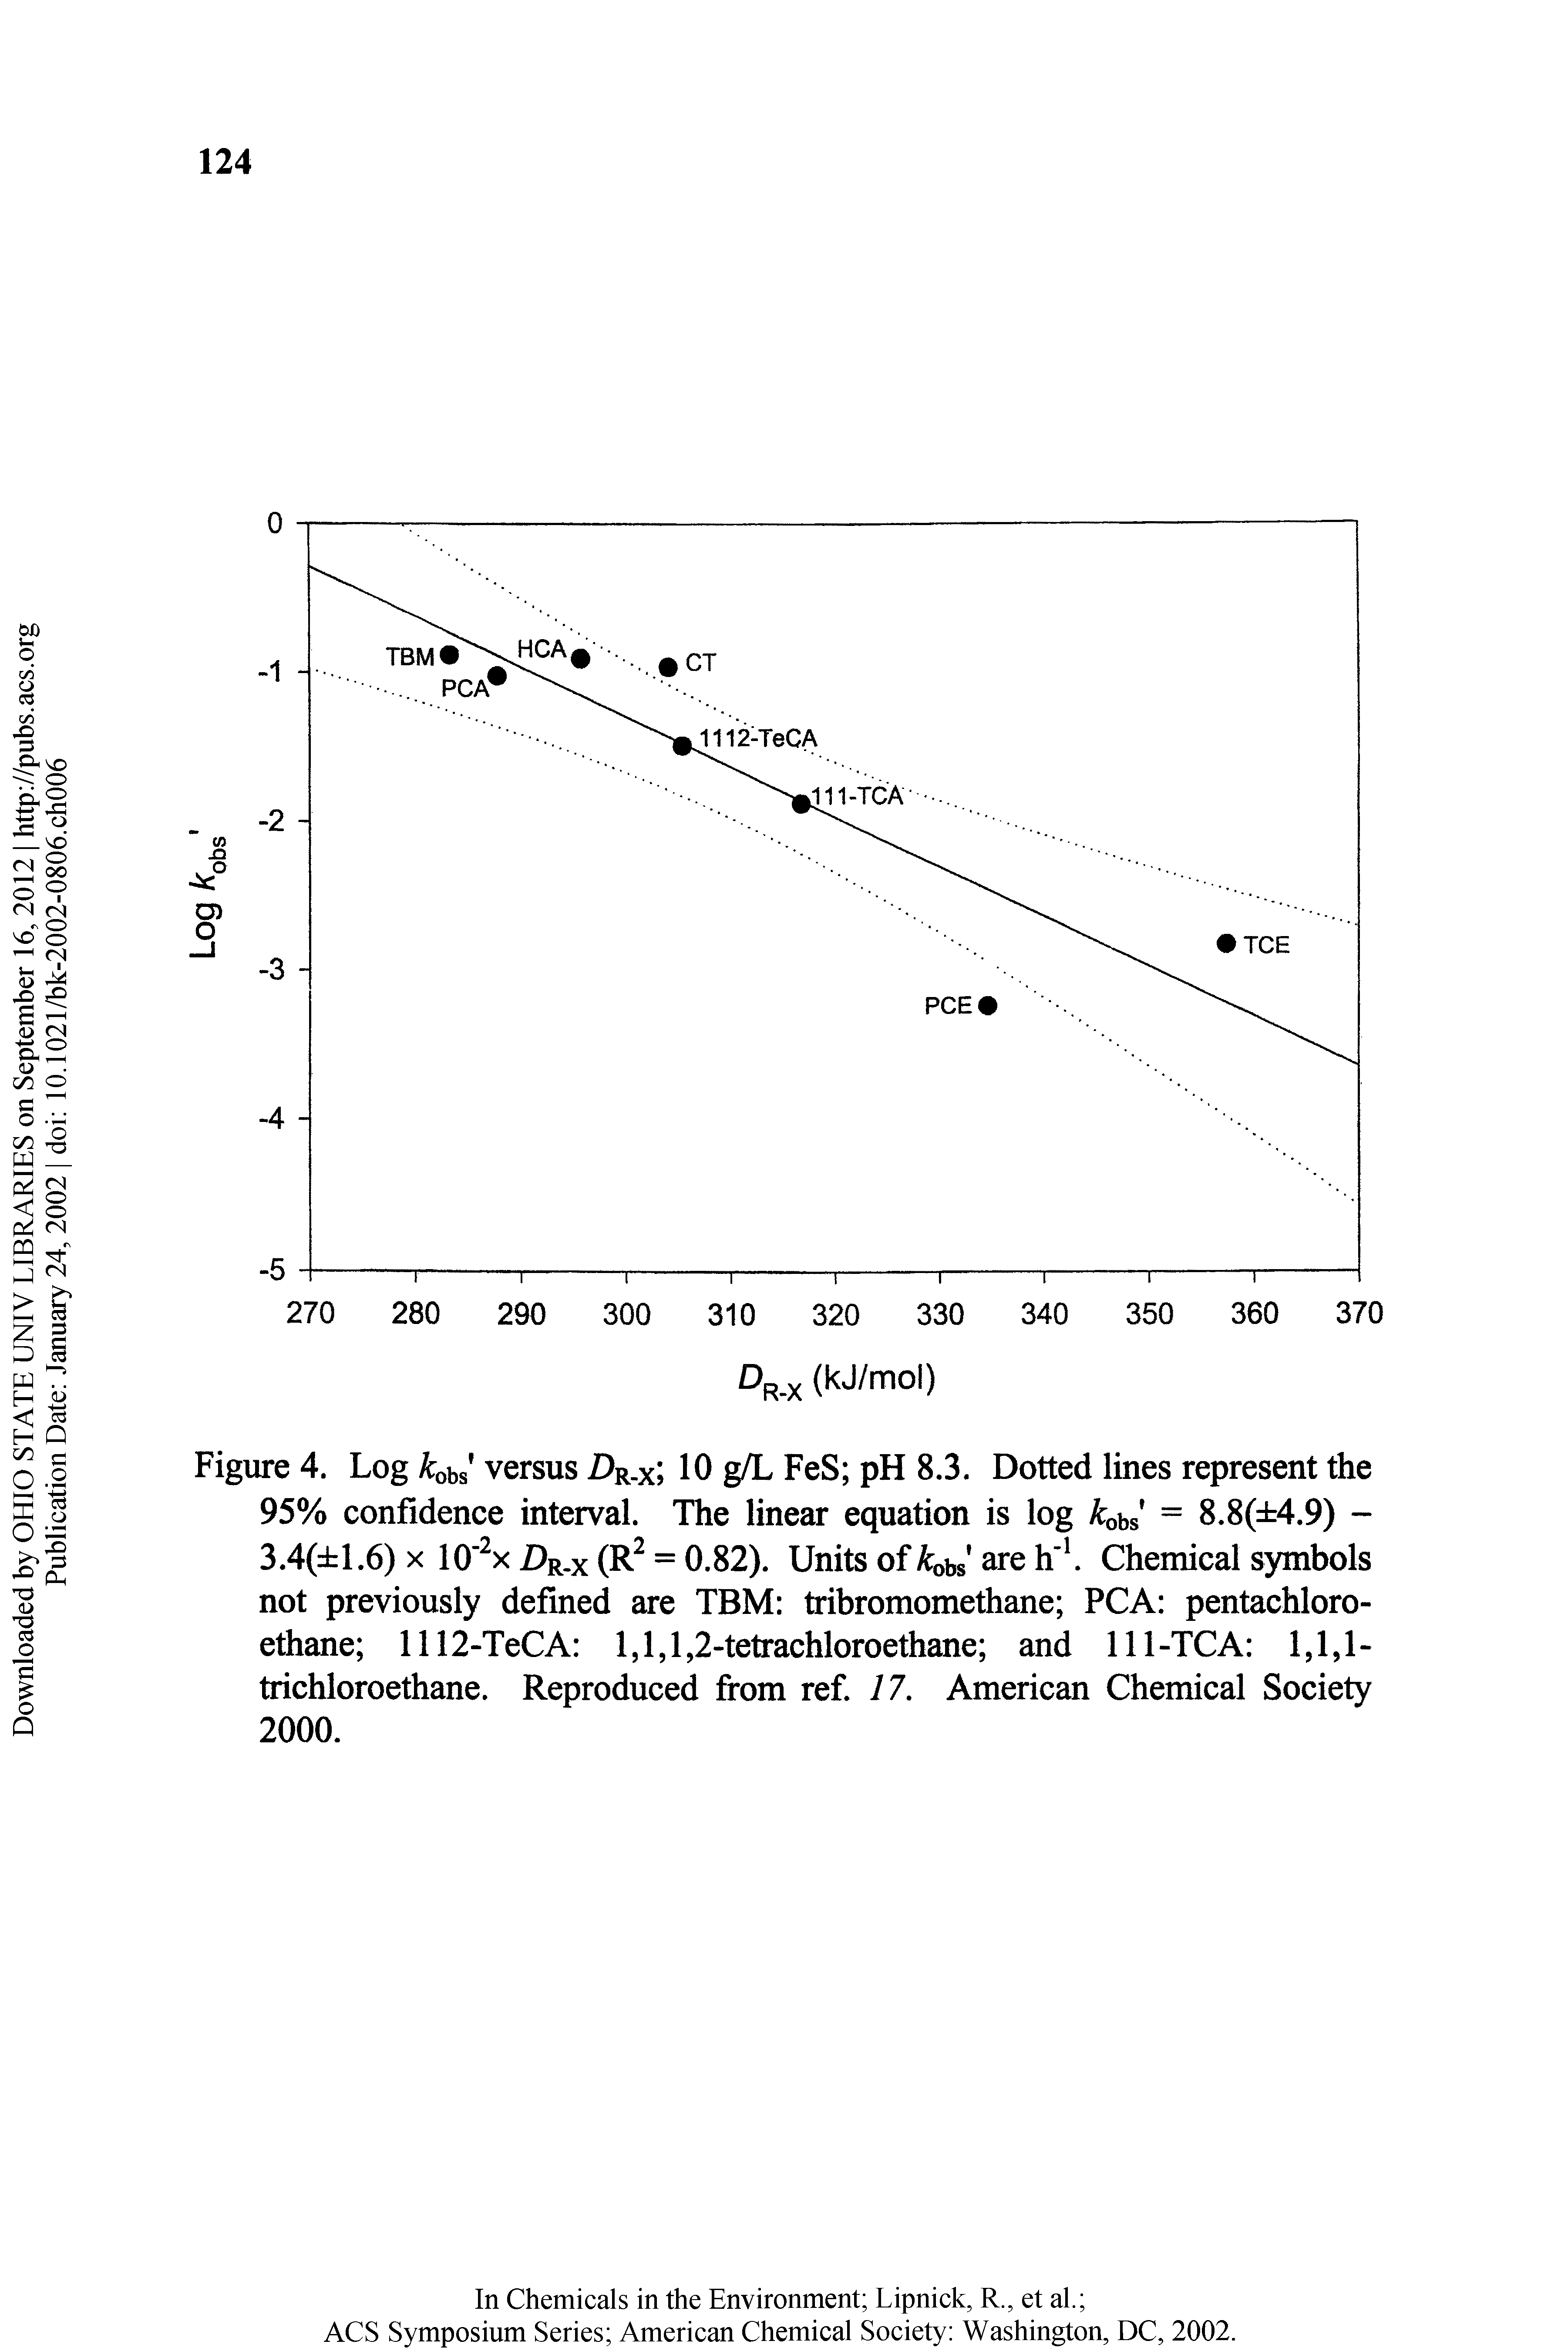 Figure 4. Log obs versus Dr-x 10 g/L FeS pH 8.3. Dotted lines represent the 95% confidence interval. The linear equation is log kobs = 8.8( 4.9) -3.4( 1.6) X lO x Dr.x (R = 0.82). Units of are h. Chemical symbols not previously defined are TBM tribromomethane PCA pentachloro-ethane 1112-TeCA 1,1,1,2-tetrachloroethane and 111-TCA 1,1,1-trichloroethane. Reproduced from ref 17. American Chemical Society 2000.